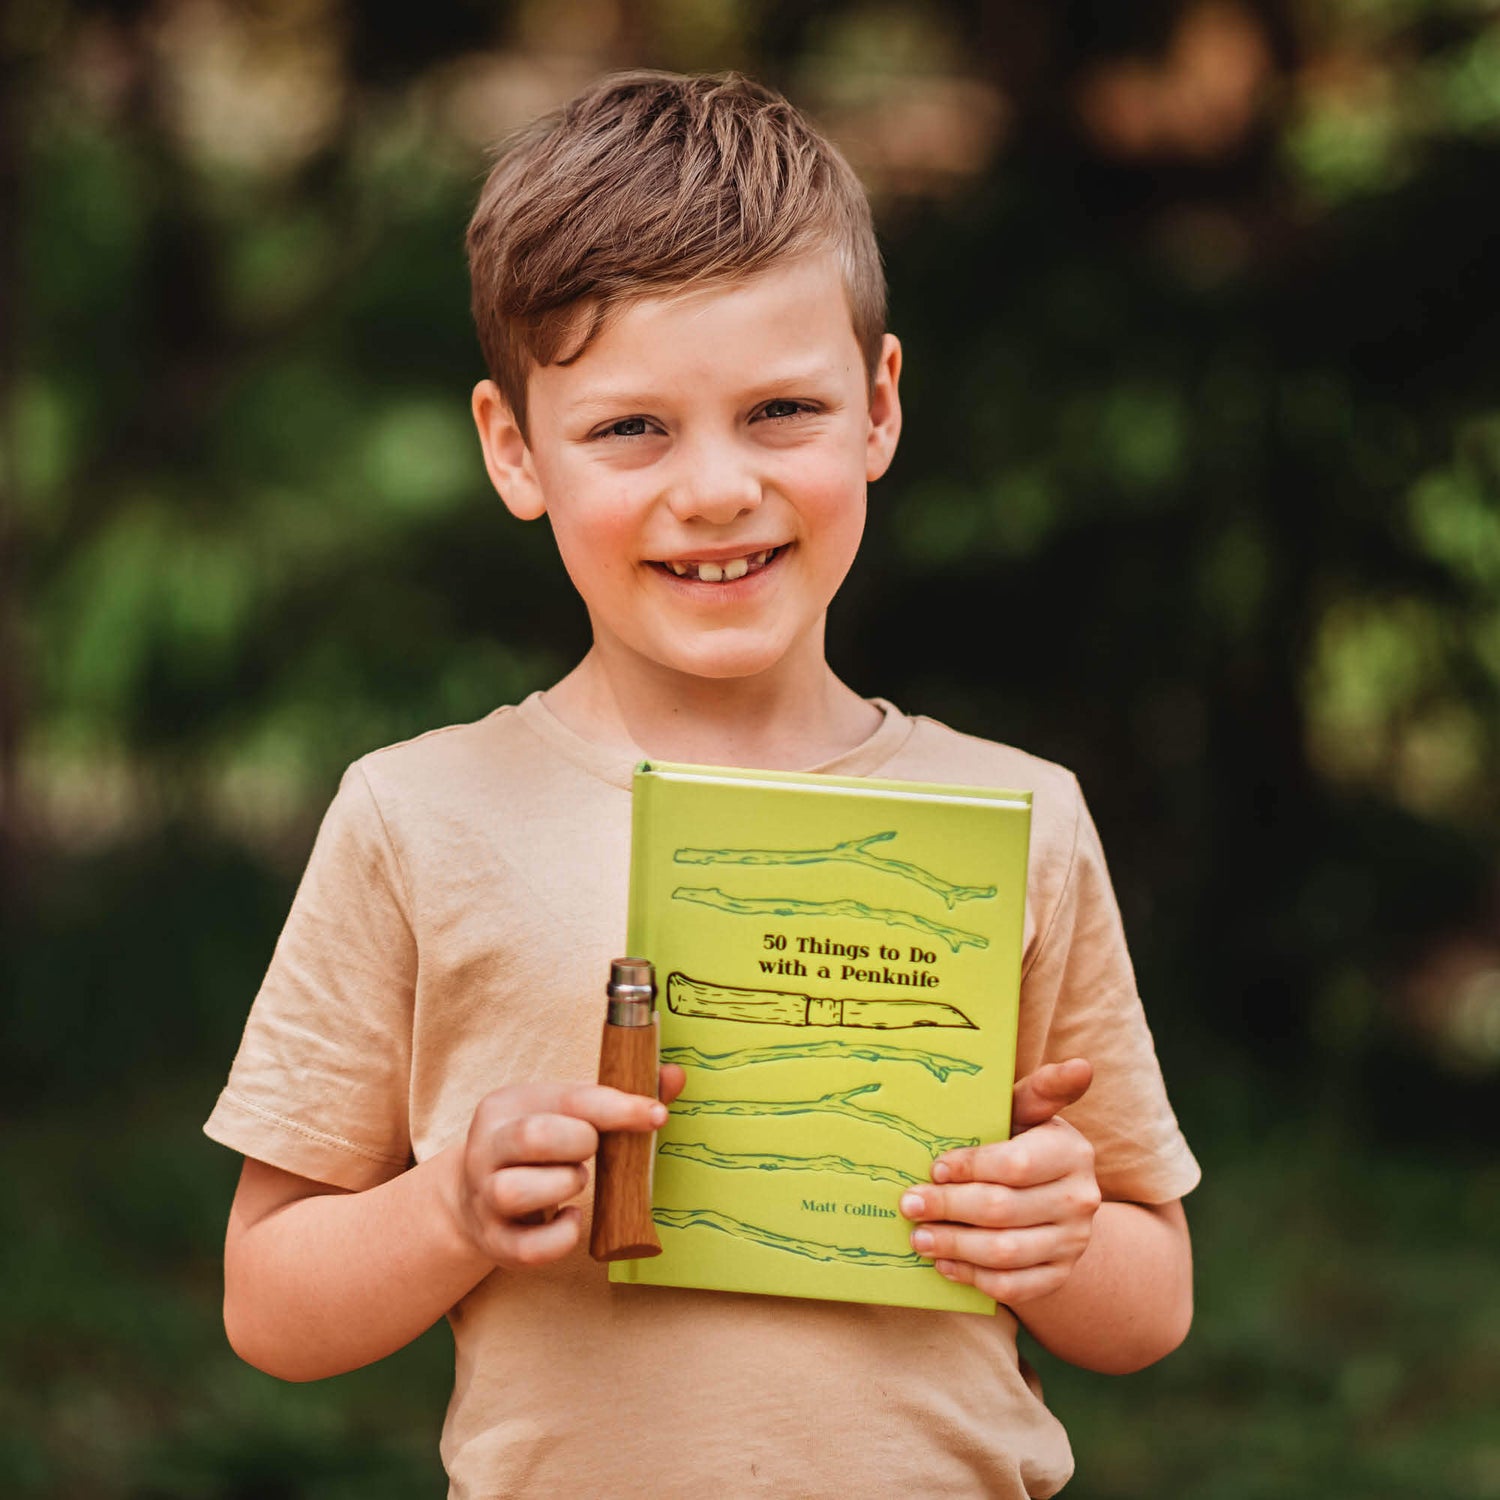 Boy in nature holding 50 things to do with a penknife book wood whittling book for kids wood working projects from Your Wild Books